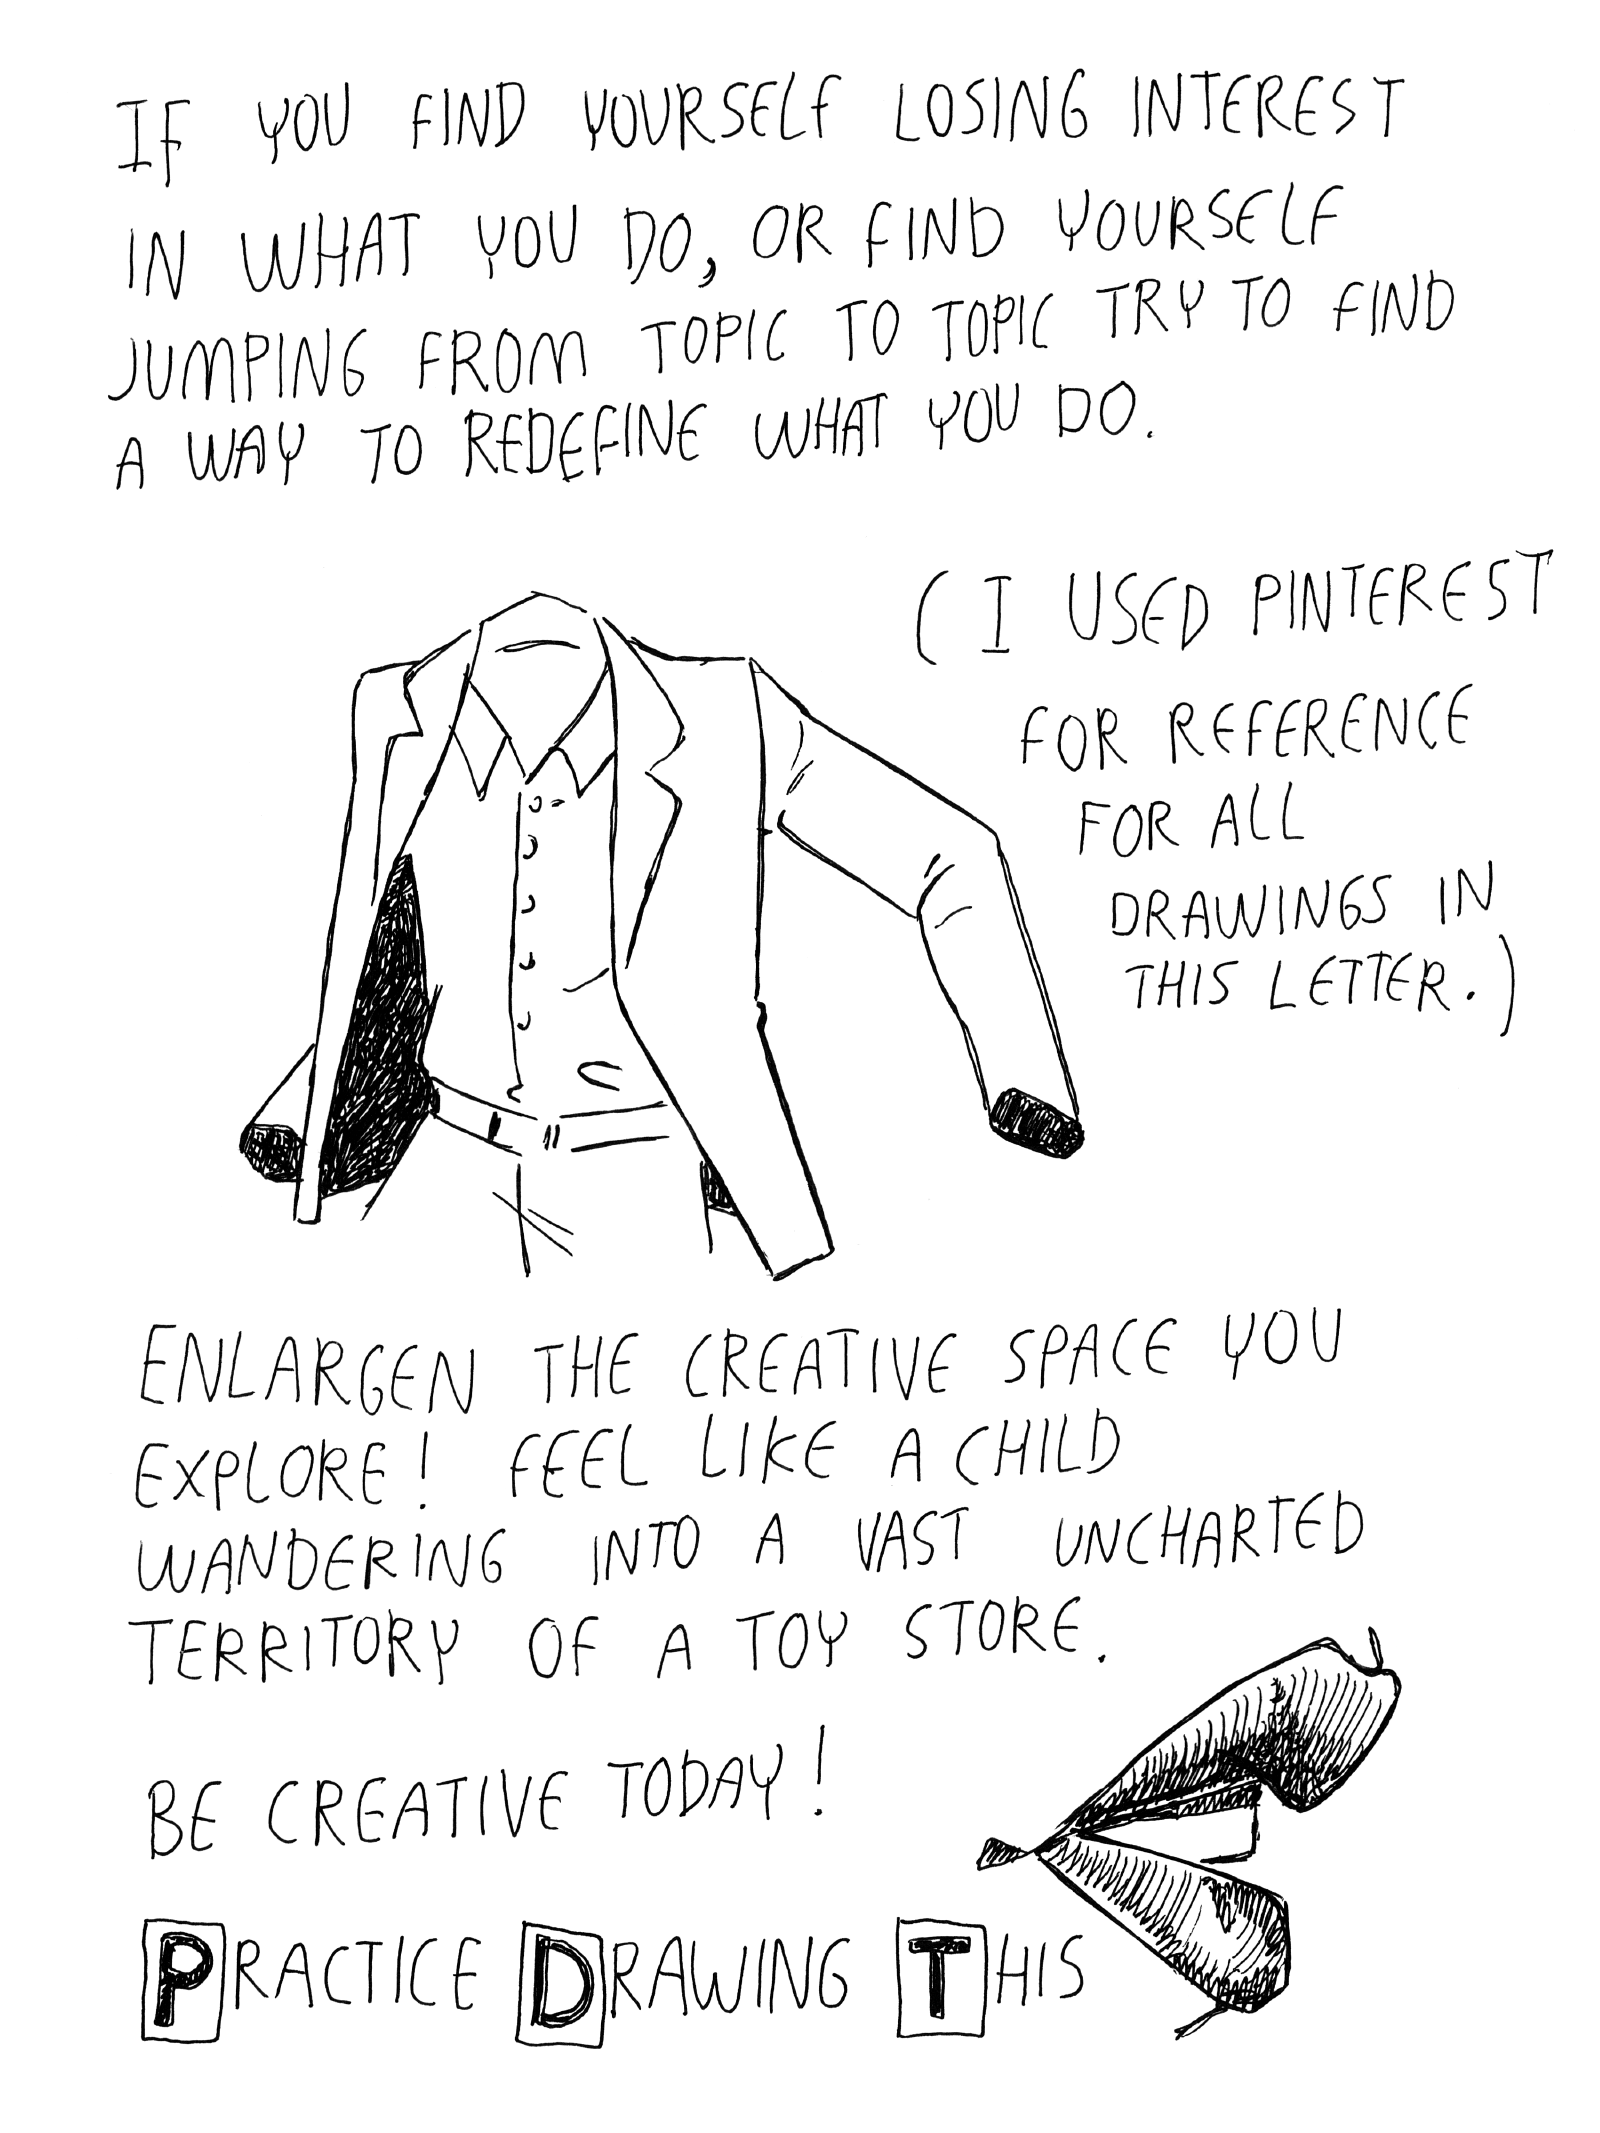 If you find yourself losing interest in what you do, or if you find yourself jumping from topic to topic, try to find a way to redefine what you do. Enlargen the creative space you explore! Feel like a child wandering into a vast uncharted territory of a toy store. Be creative today! PracticeDrawingThis